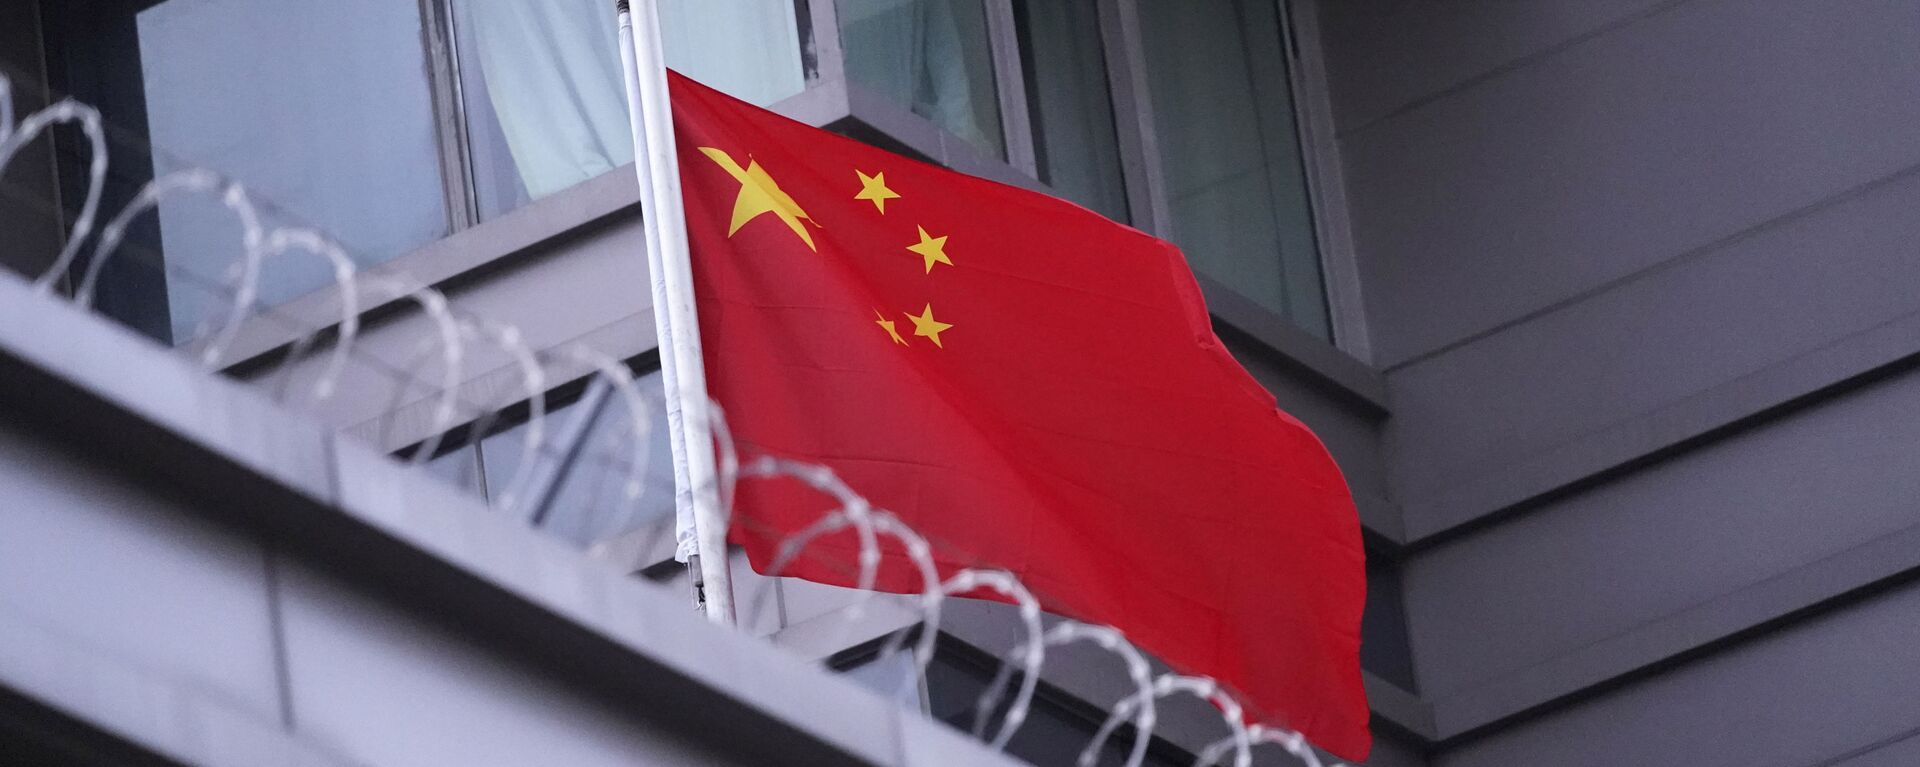 The flag of China flies outside the Chinese Consulate Wednesday, July 22, 2020, in Houston.  - Sputnik International, 1920, 21.12.2021